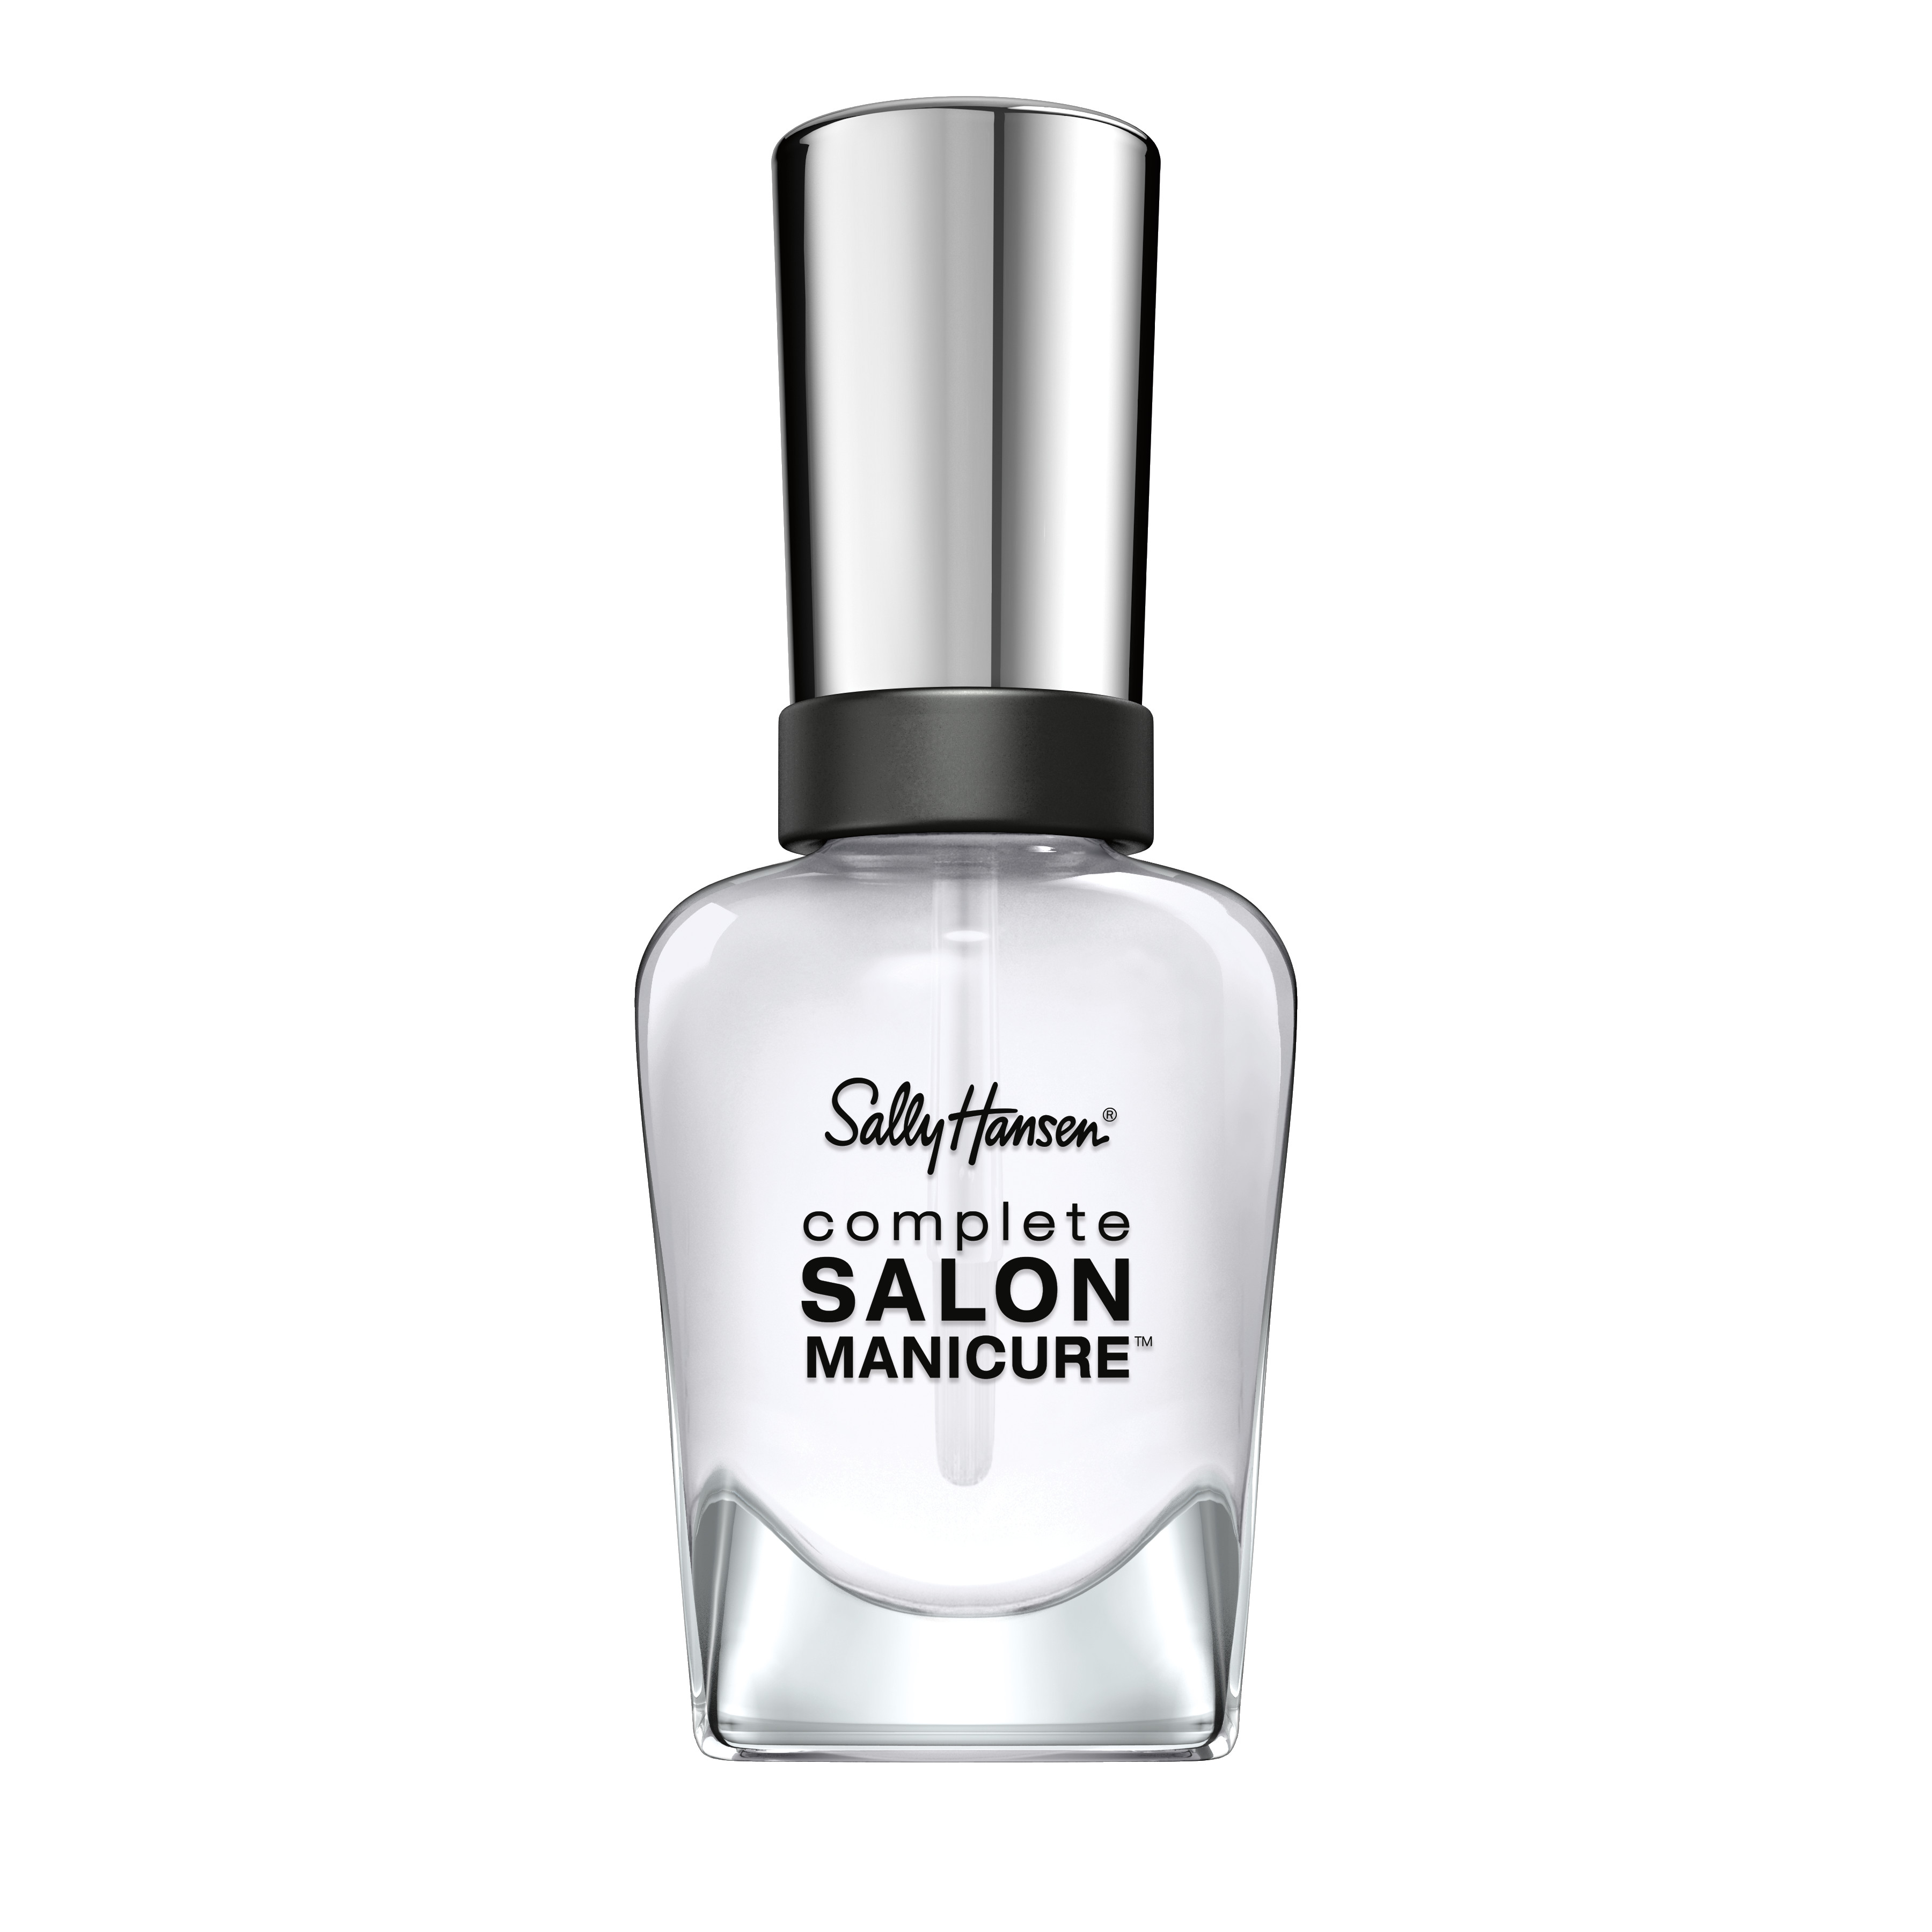 Sally Hansen Complete Salon Manicure Nail Color, Clear'd for Takeoff - image 1 of 3